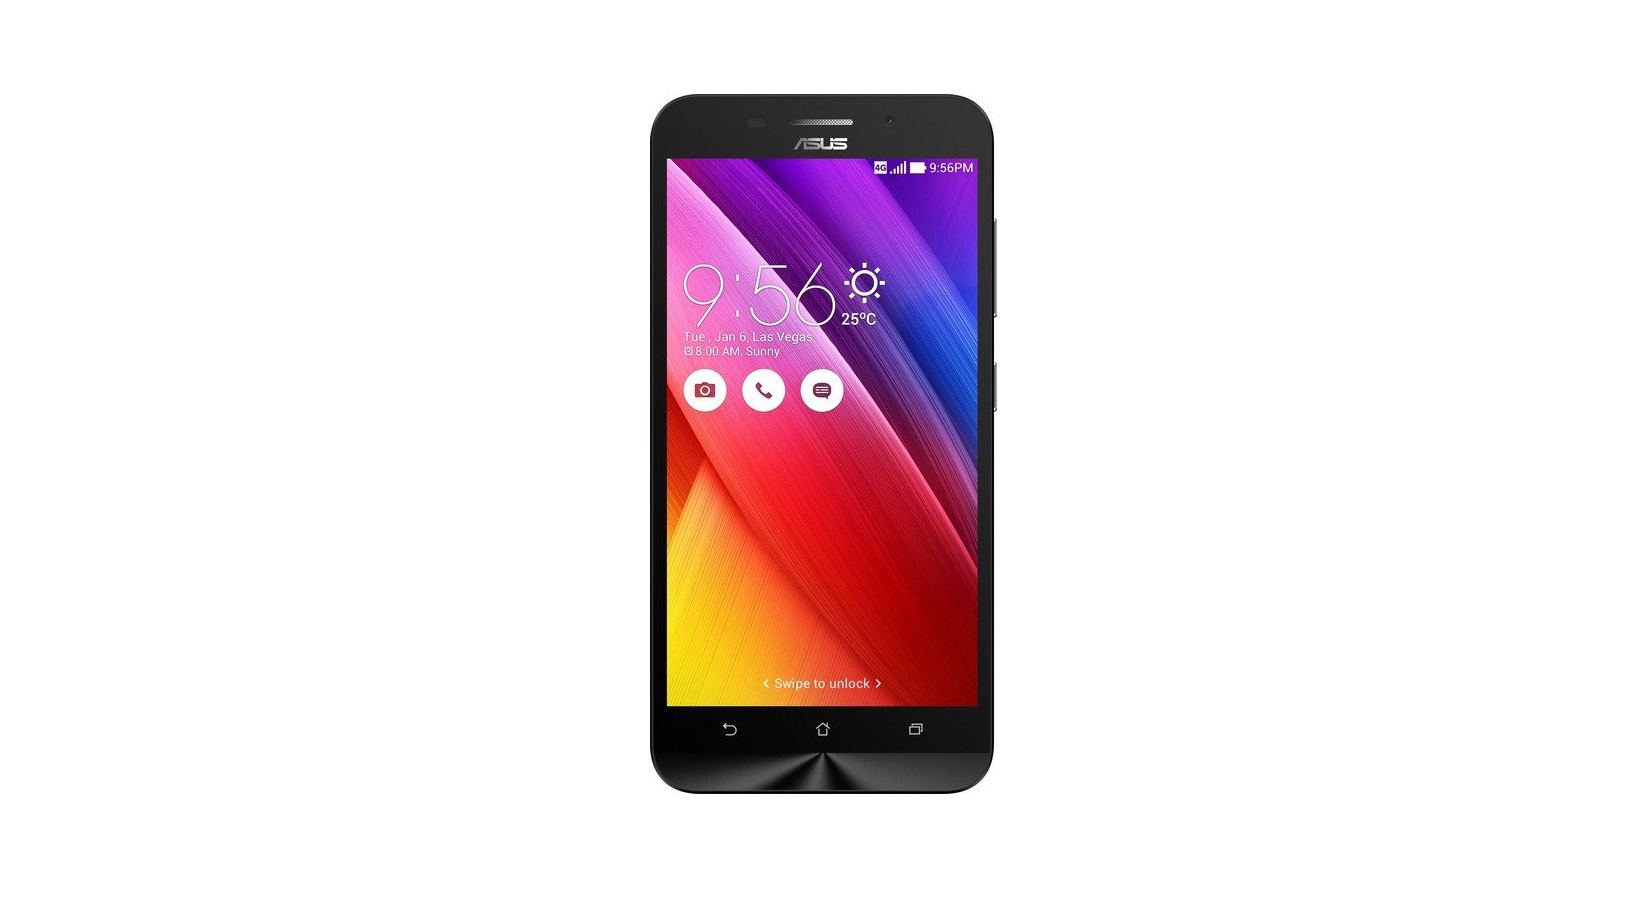 How To Fix Asus Zenfone Max ZC550KL Not Charging [Troubleshooting Guide]